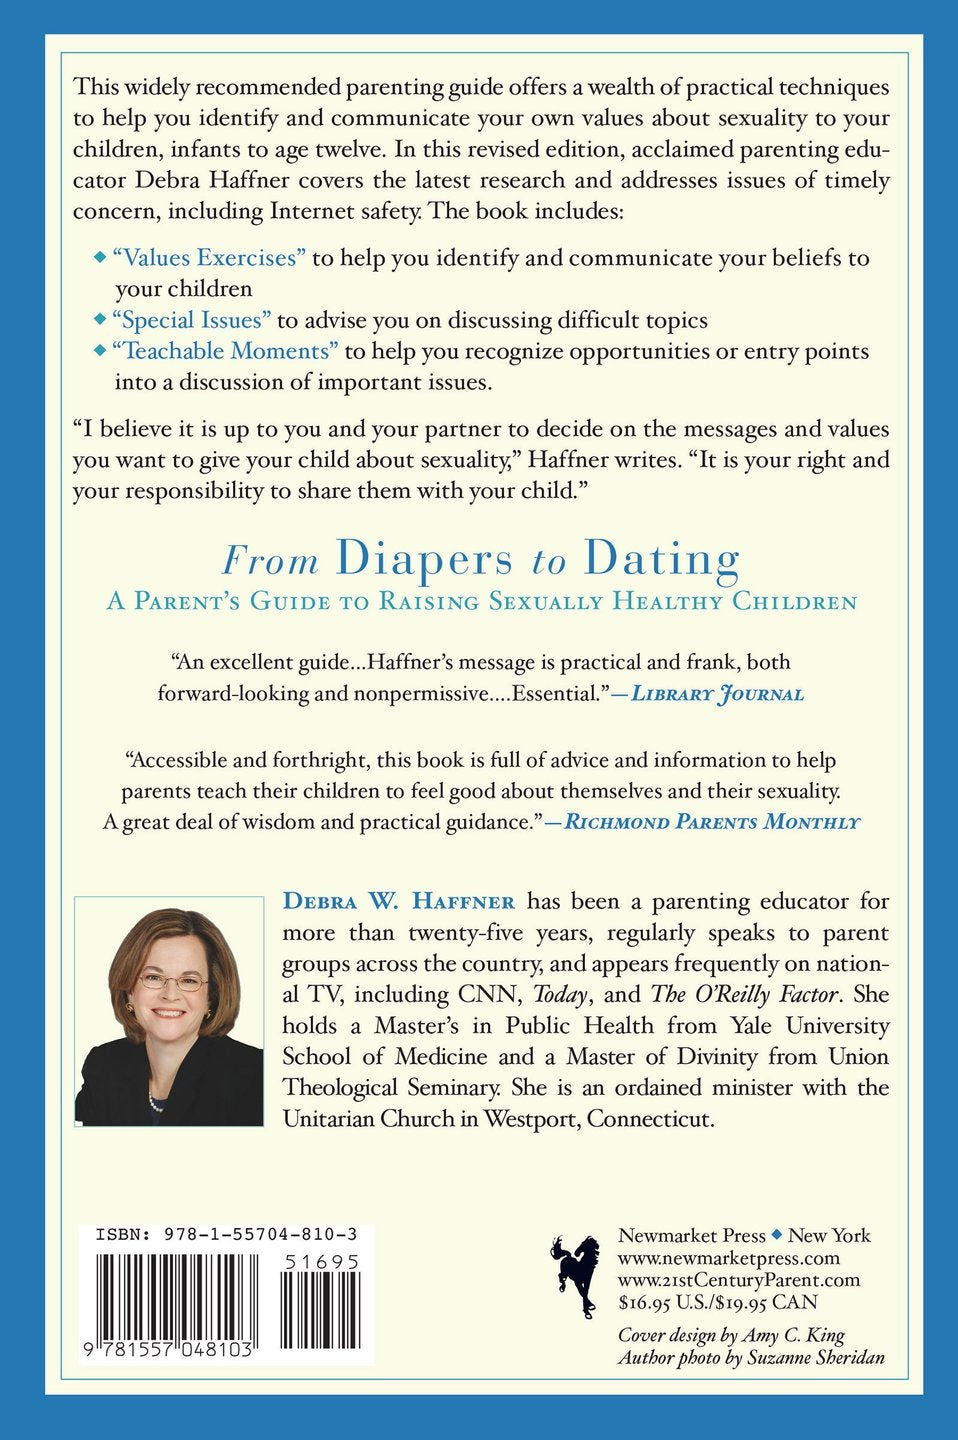 The back cover of From Diapers to Dating.